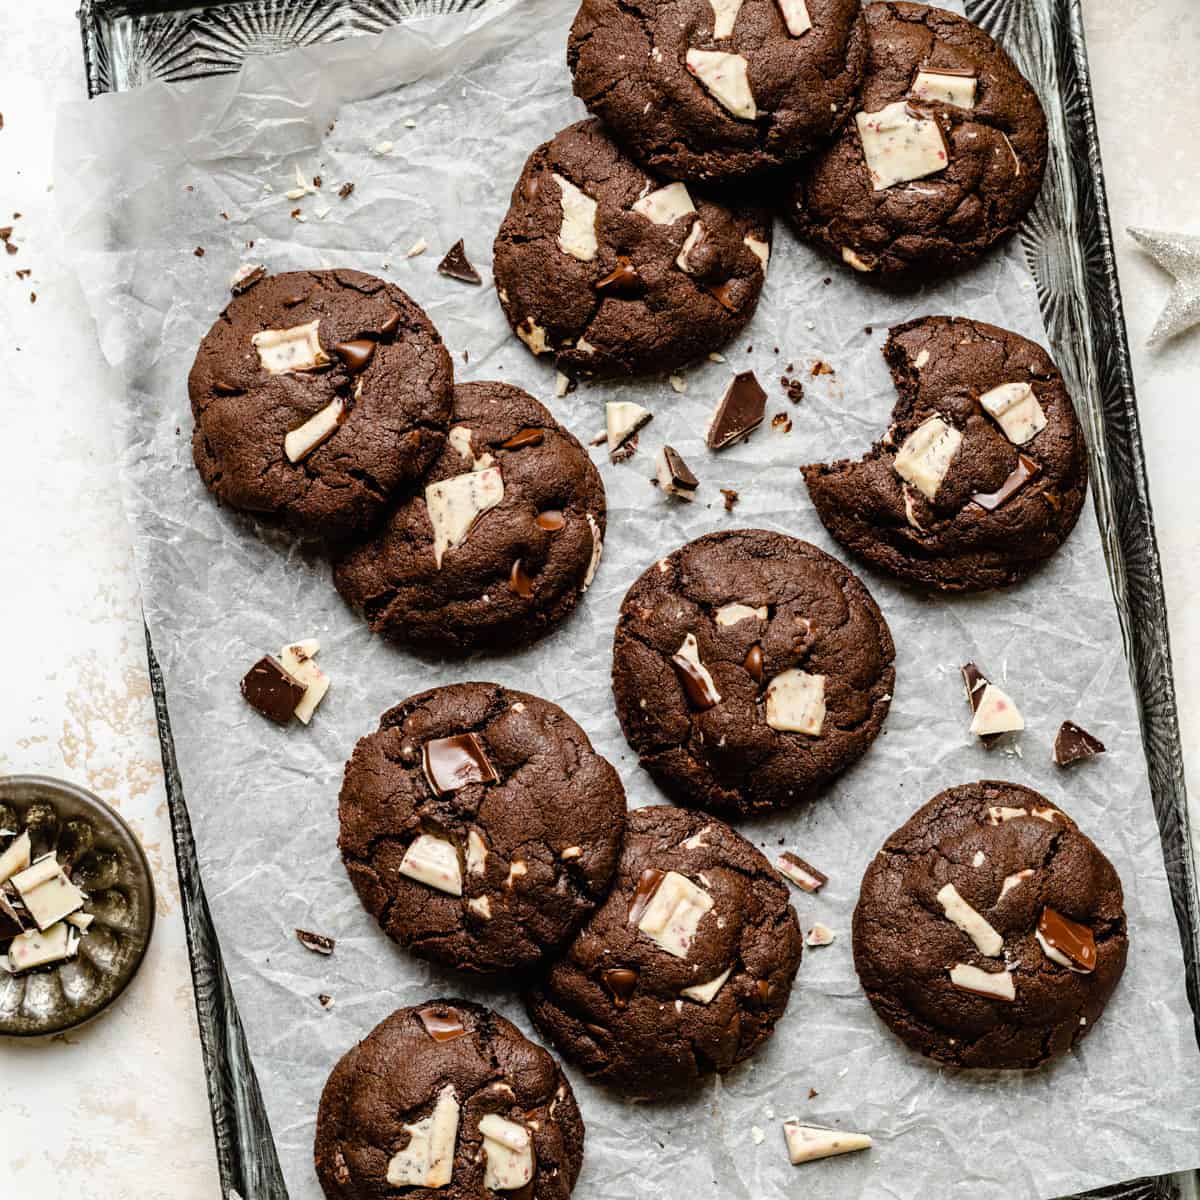 An array of double chocolate chip mint cookies on a baking sheet with broken peppermint bark around.